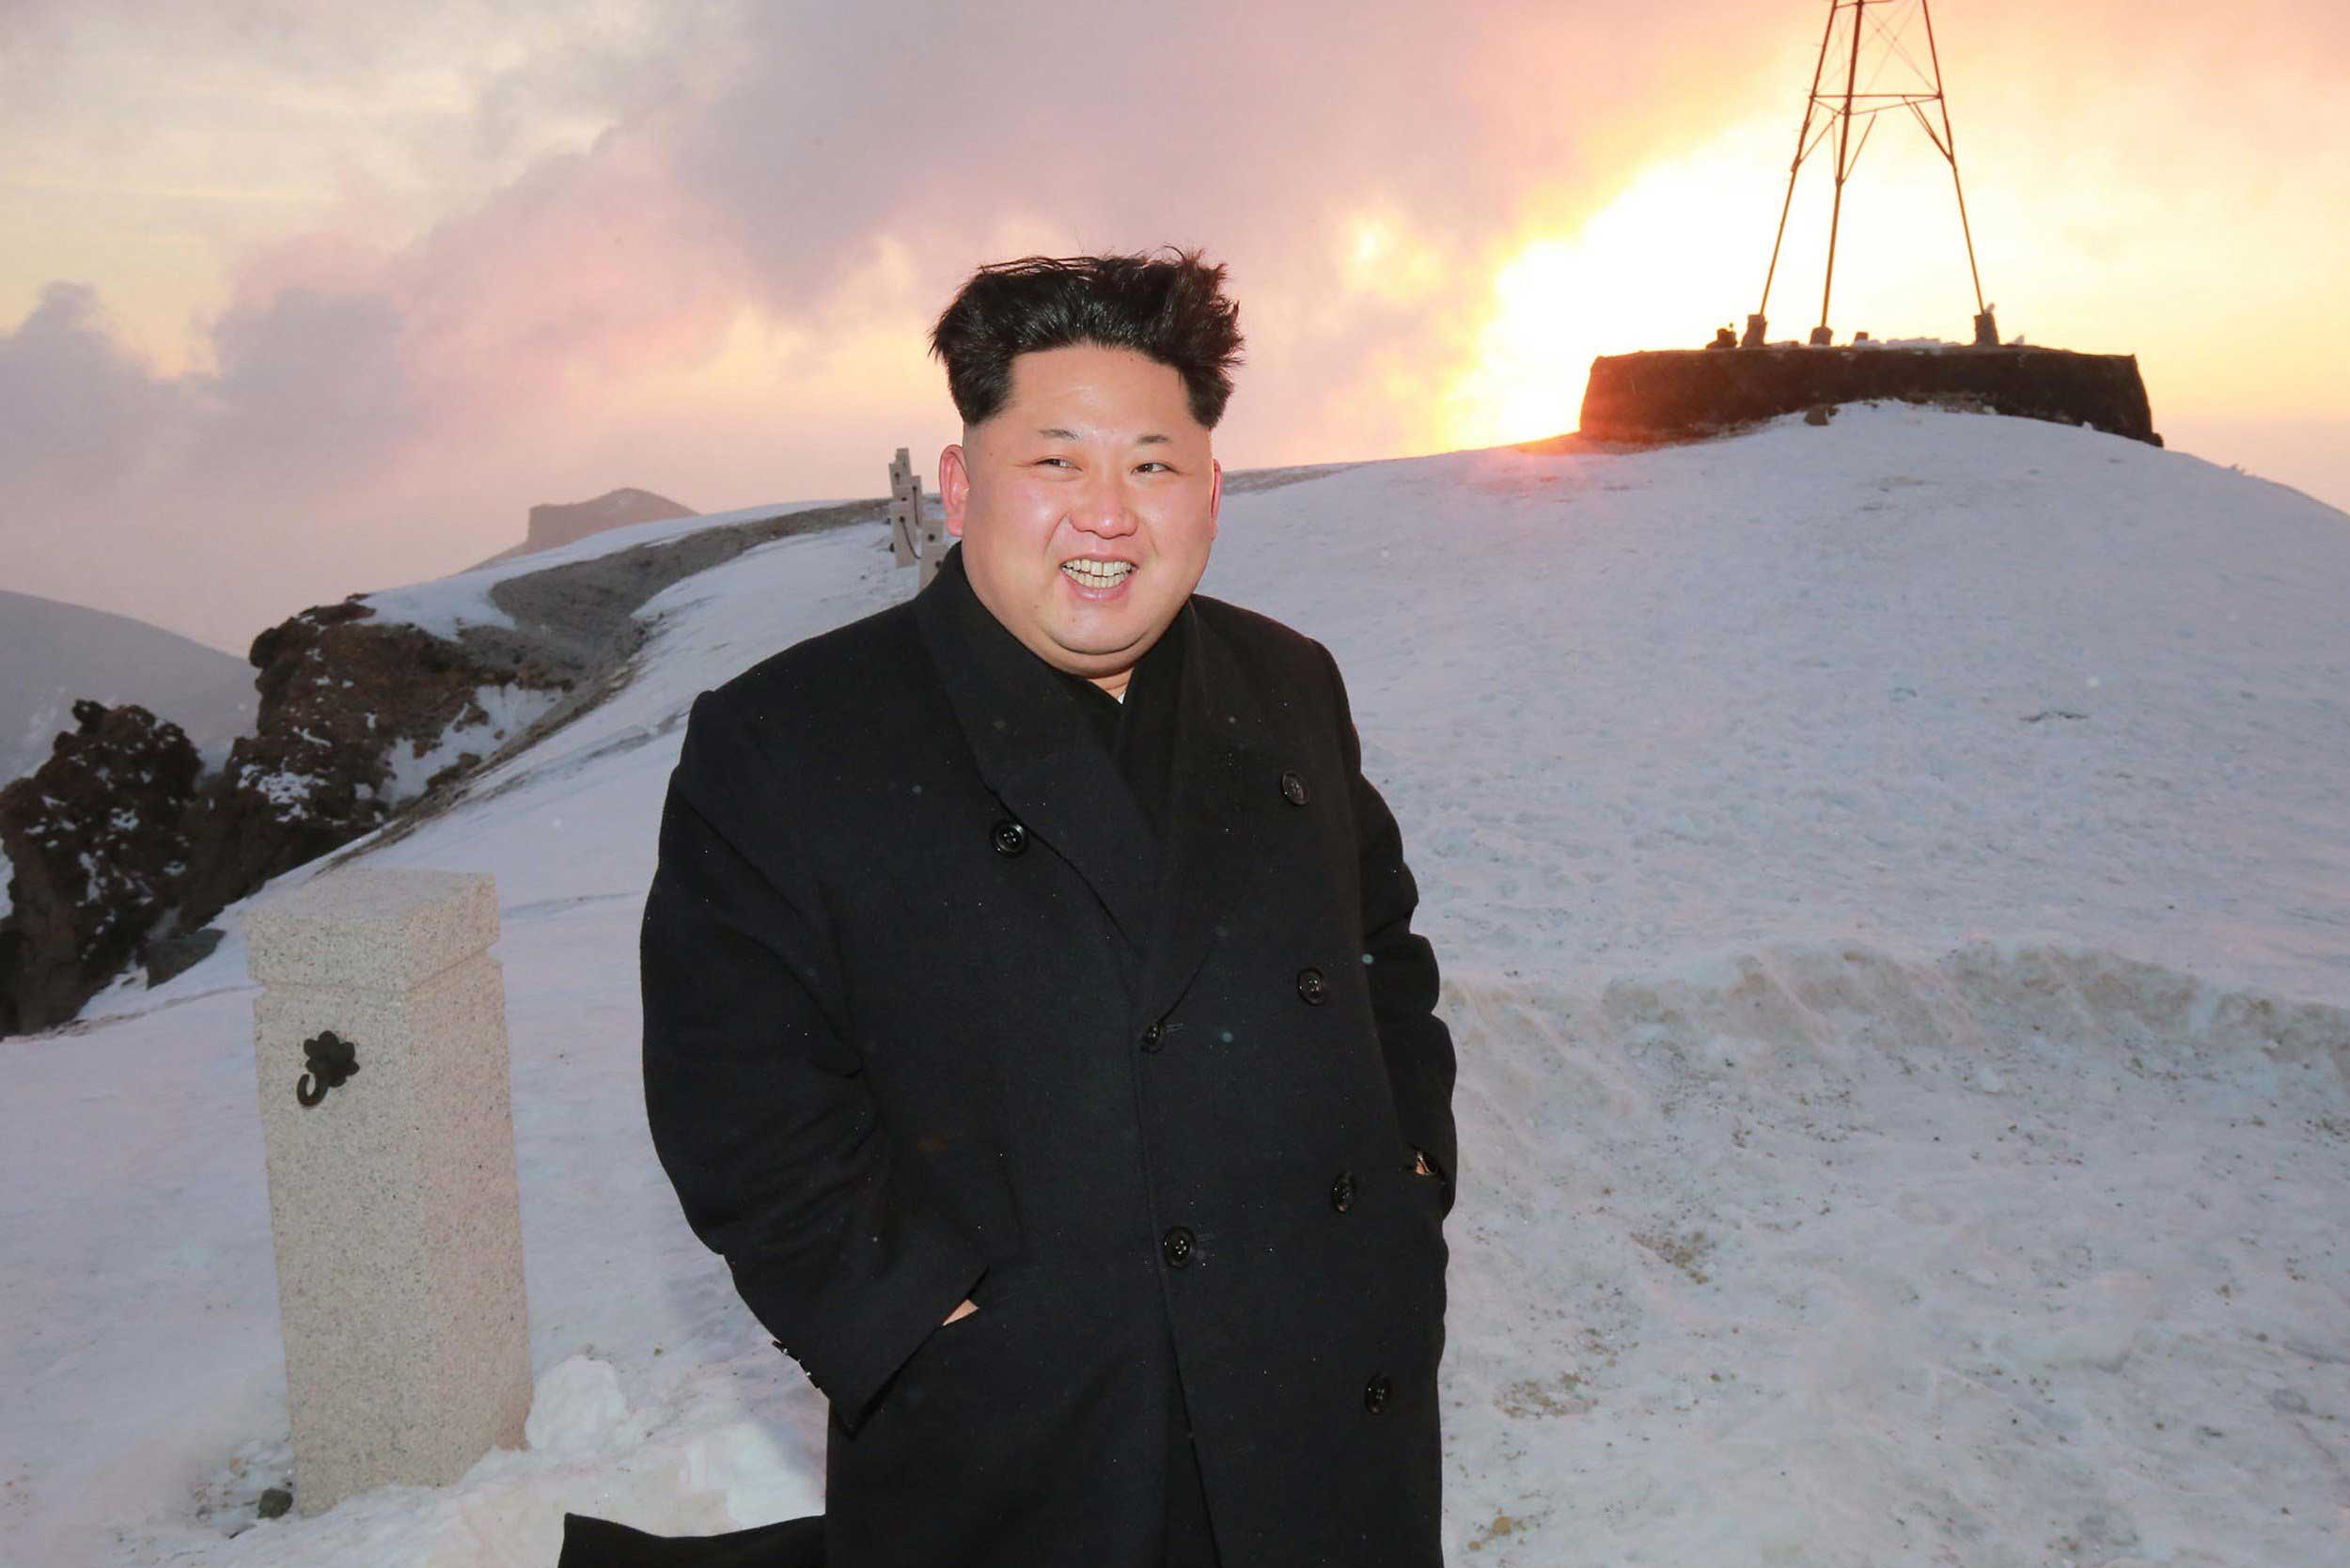 This photo taken on April 18, 2015 and released by North Korea's official Korean Central News Agency (KCNA) on April 20, 2015 shows North Korean leader Kim Jong-Un on a snow-covered Mount Paektu during sunrise in Ryanggang Province. (KNS—AFP/Getty Images)